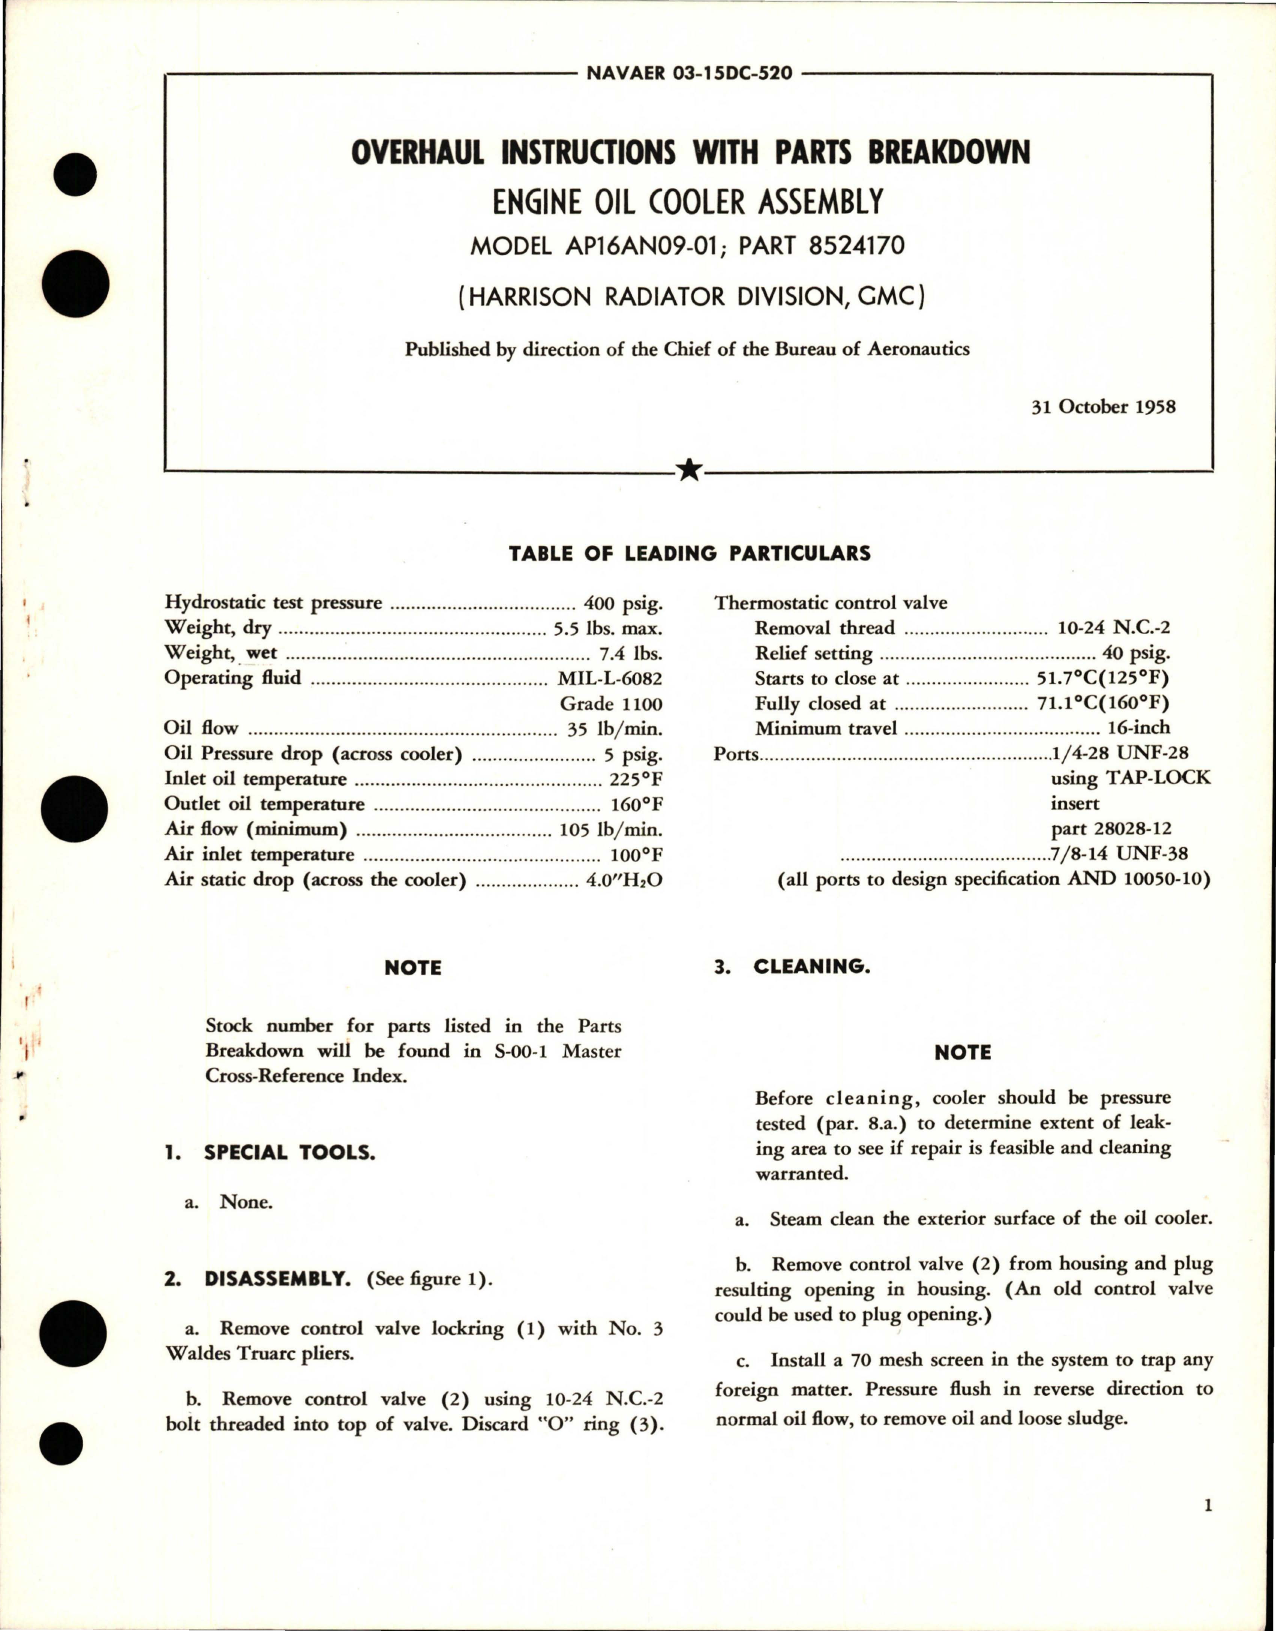 Sample page 1 from AirCorps Library document: Overhaul Instructions with Parts for Engine Oil Cooler Assembly - Model AP16AN09-01 - Part 8524170